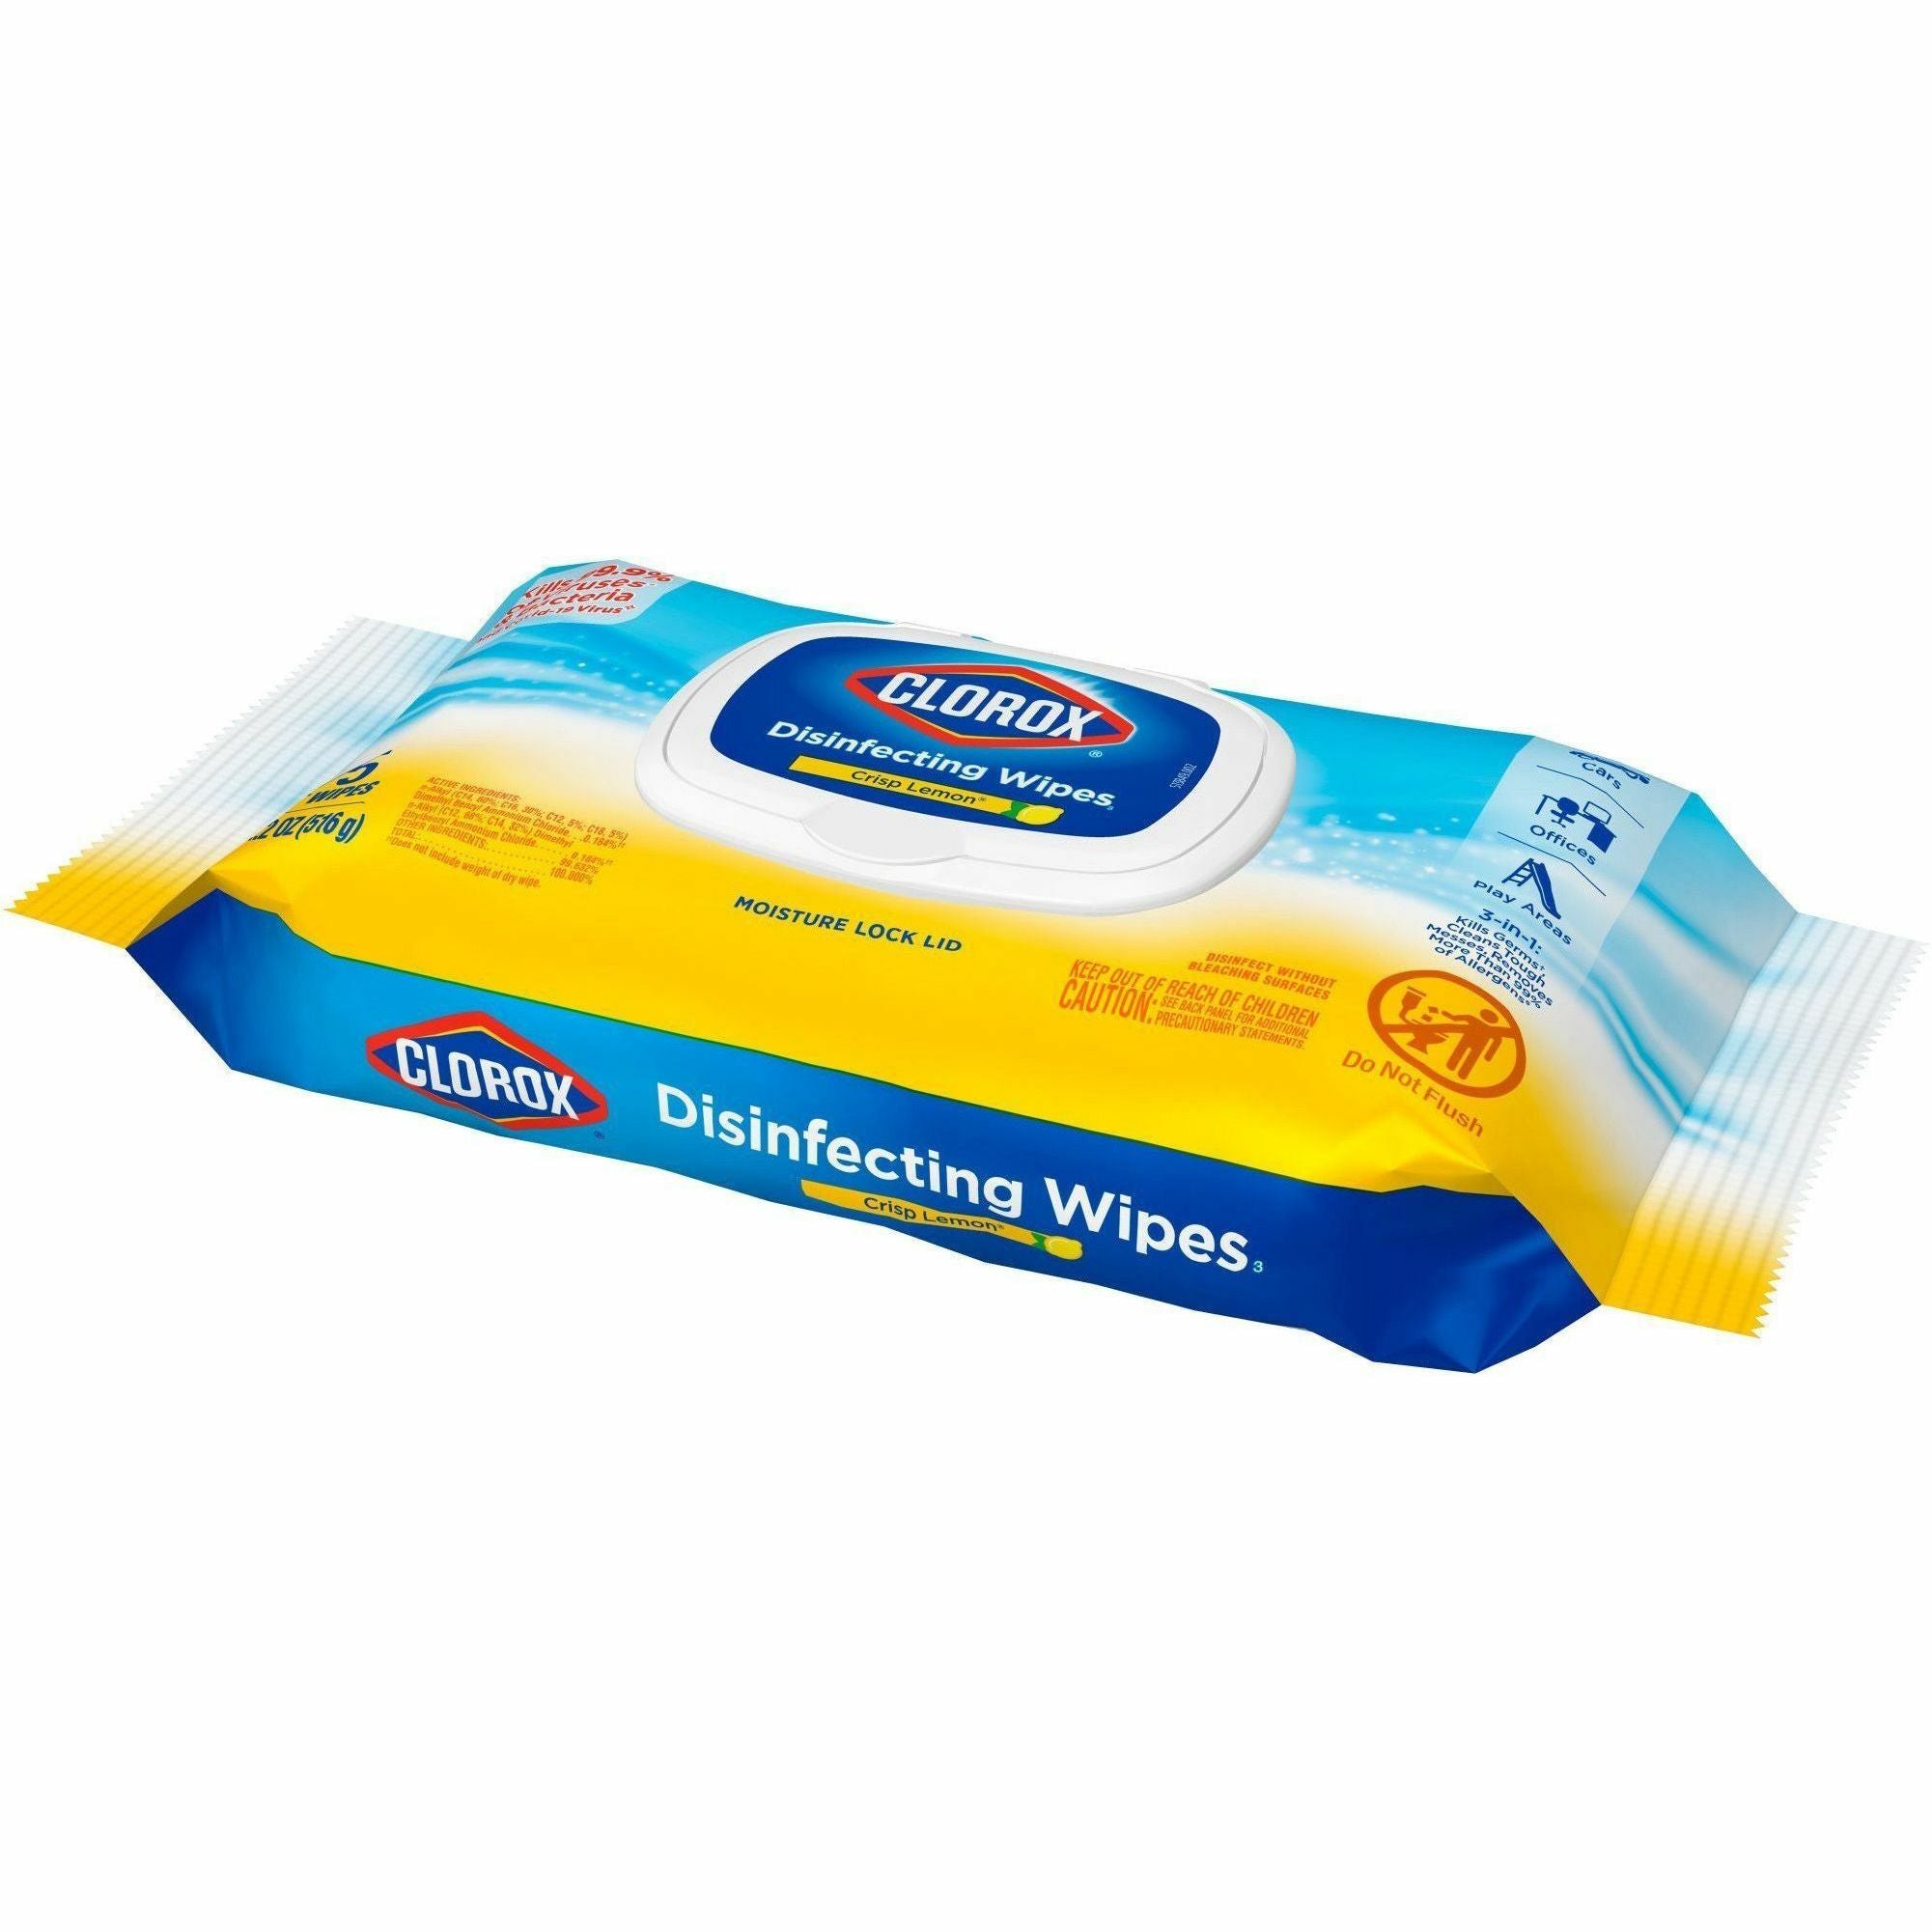 Clorox Bleach-free Disinfecting Cleaning Wipes - Crisp Lemon Scent - 75 / Packet - 6 / Carton - Bleach-free, Antibacterial - White - 3